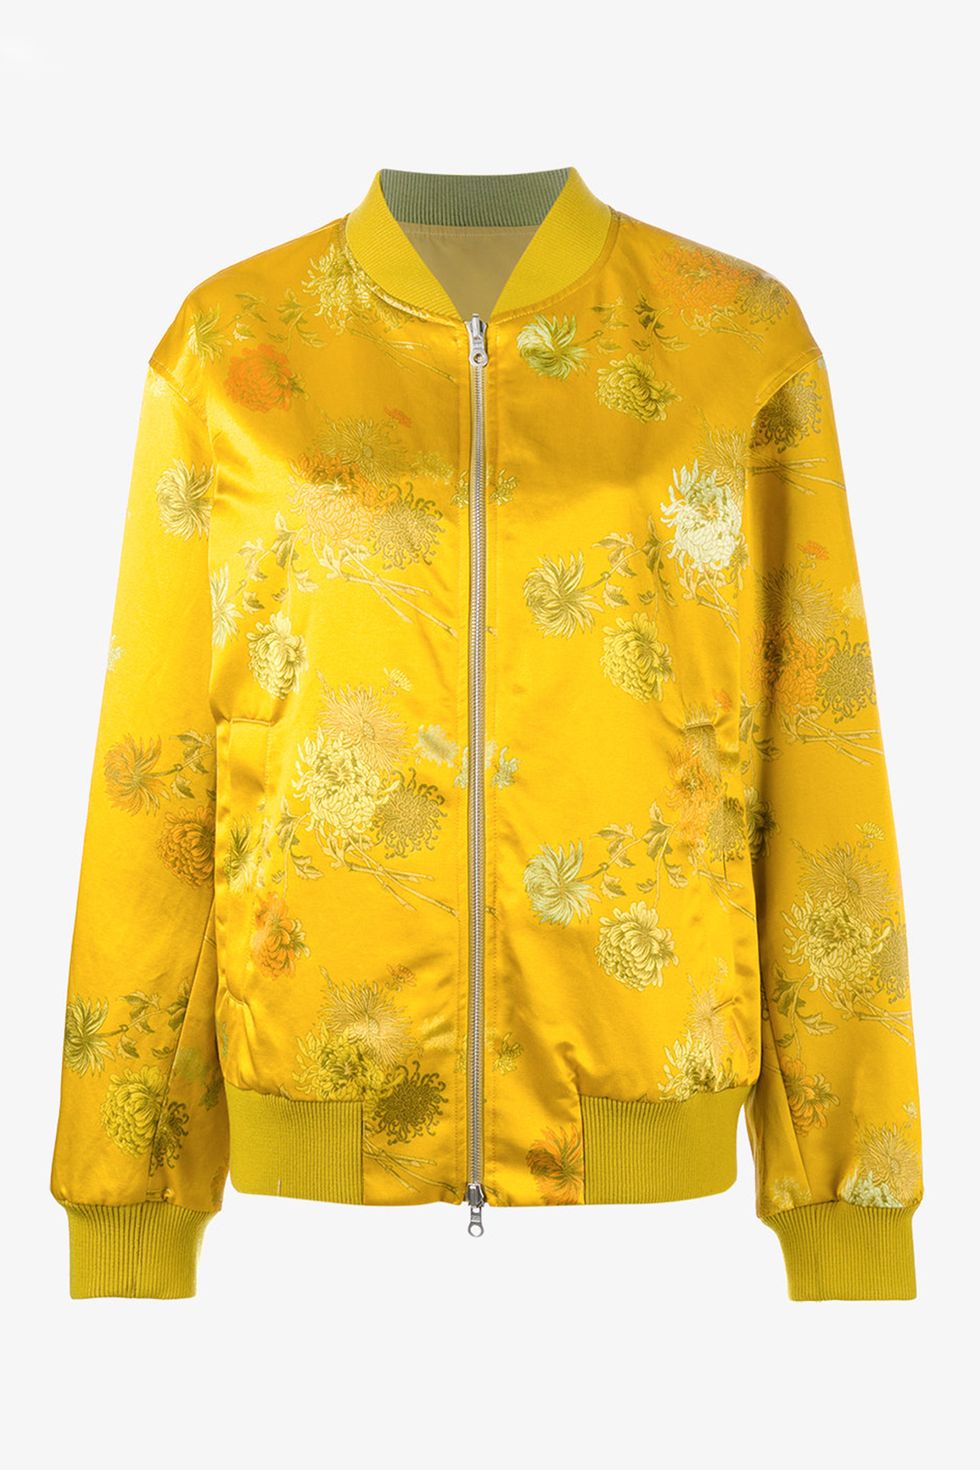 Clothing, Outerwear, Jacket, Yellow, Sleeve, Top, Blouse, 